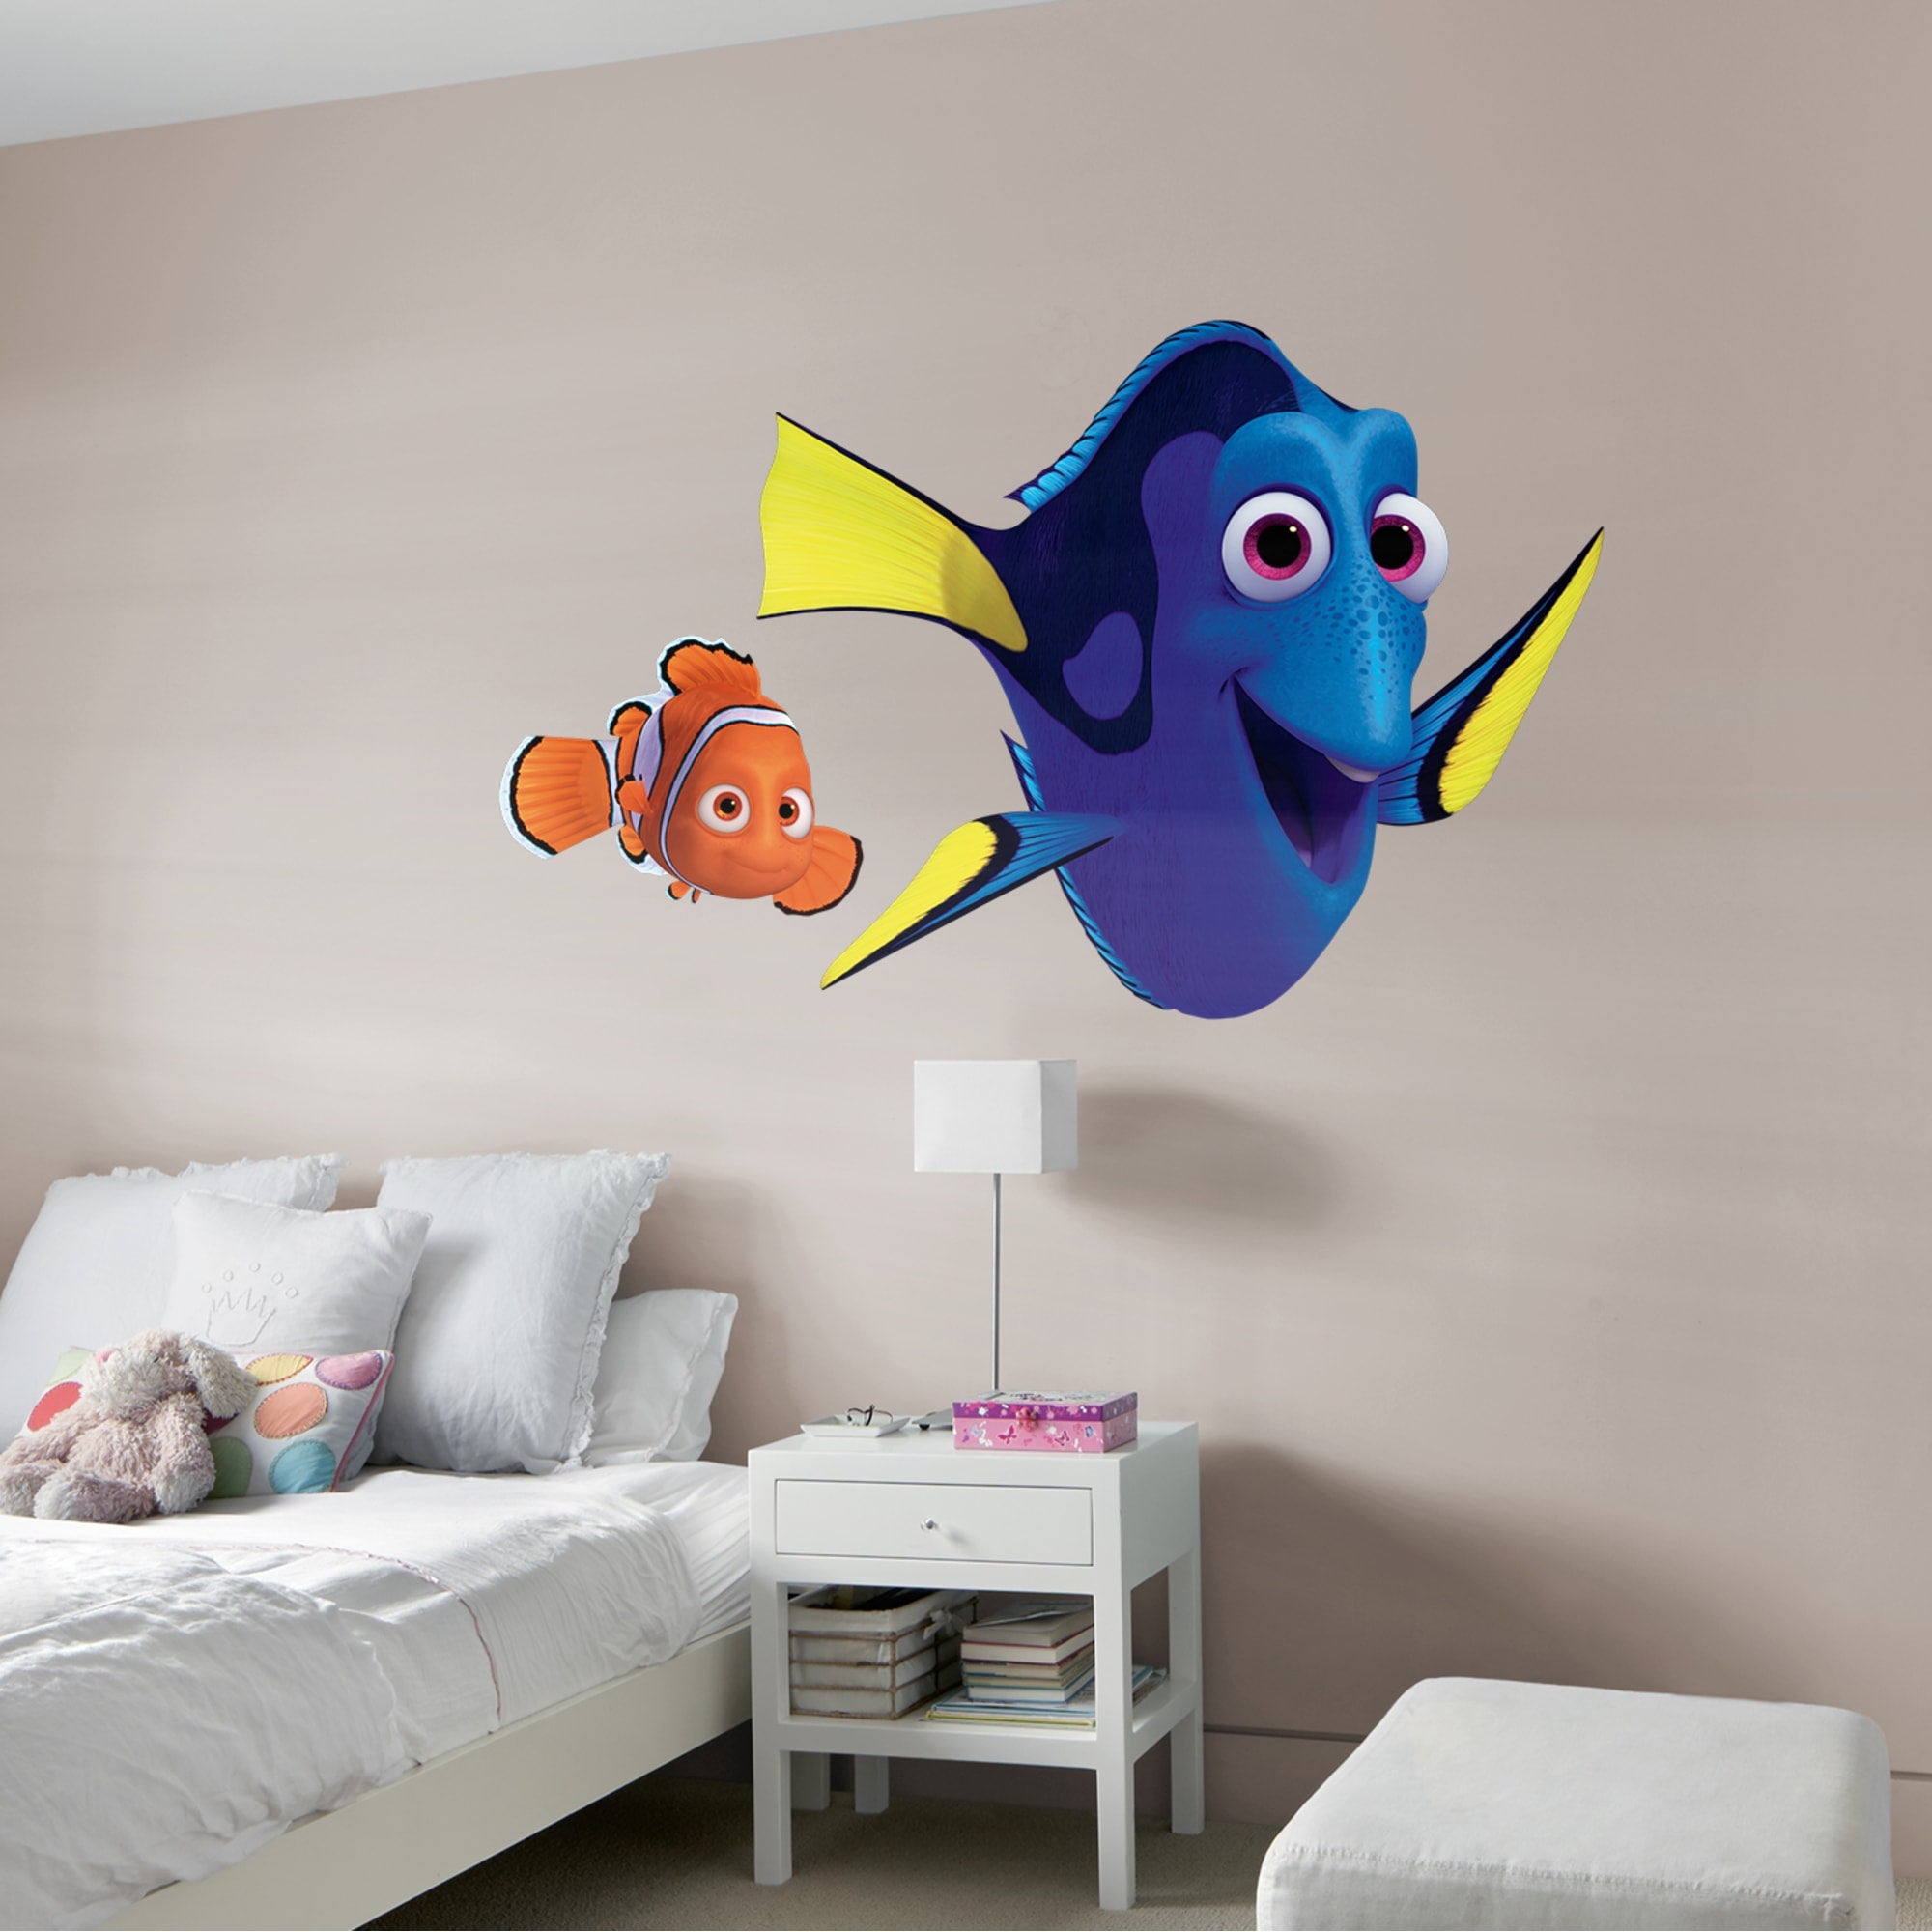 Finding Dory: Nemo and Dory - Officially Licensed Disney/PIXAR Removable Wall Graphic 52.0"W x 39.5"H by Fathead | Vinyl